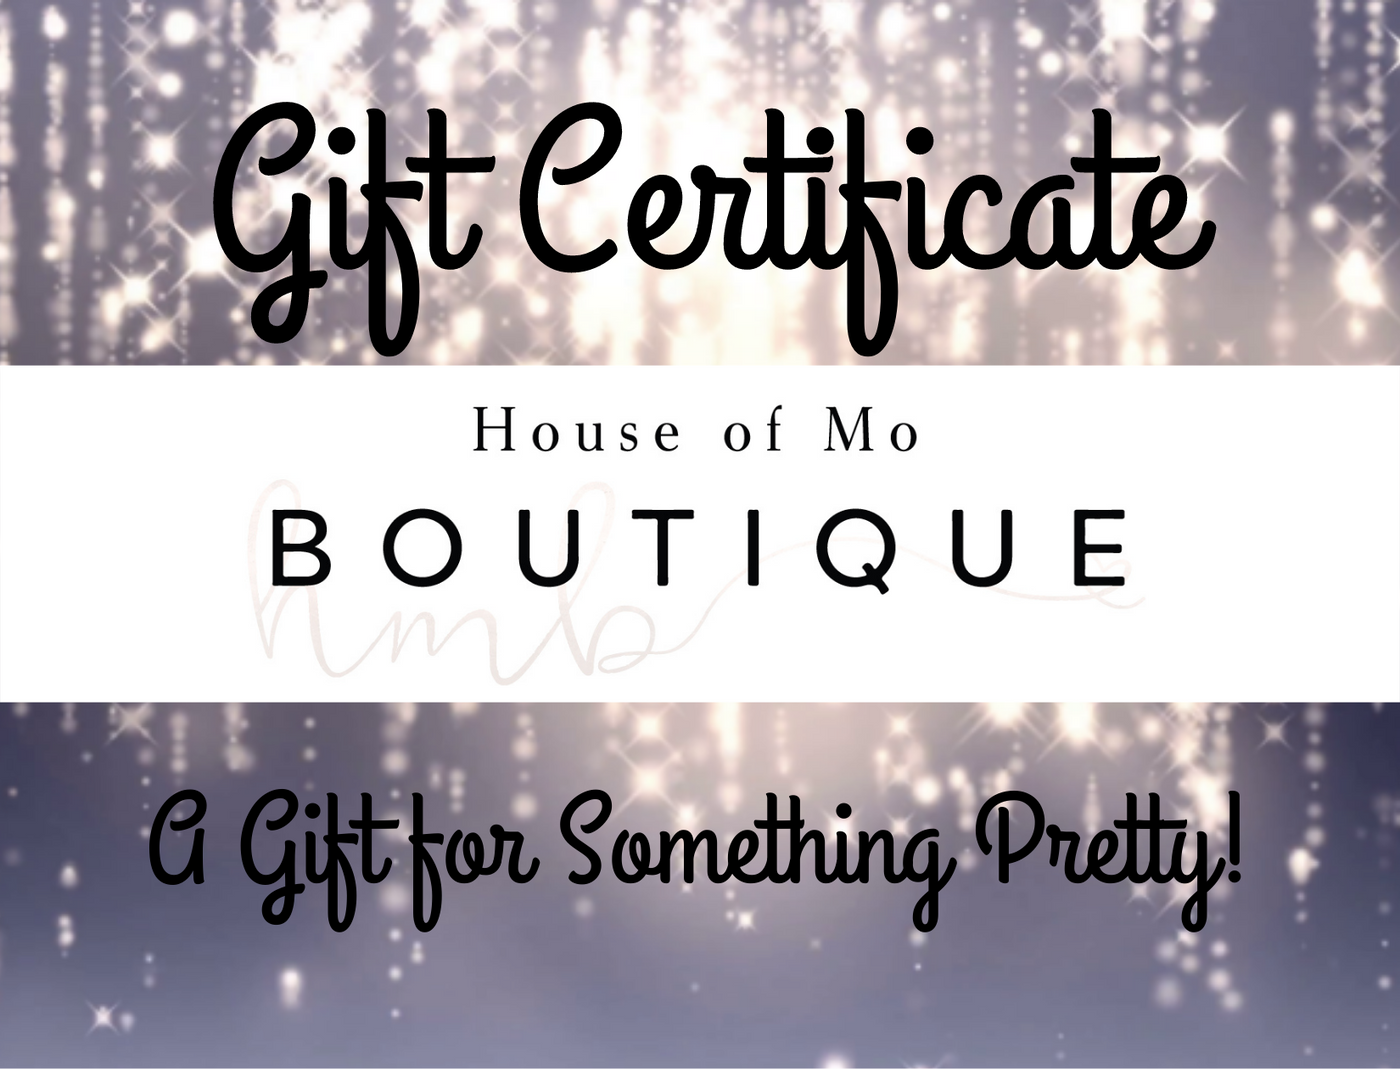 Gift Certificate for Something Pretty!